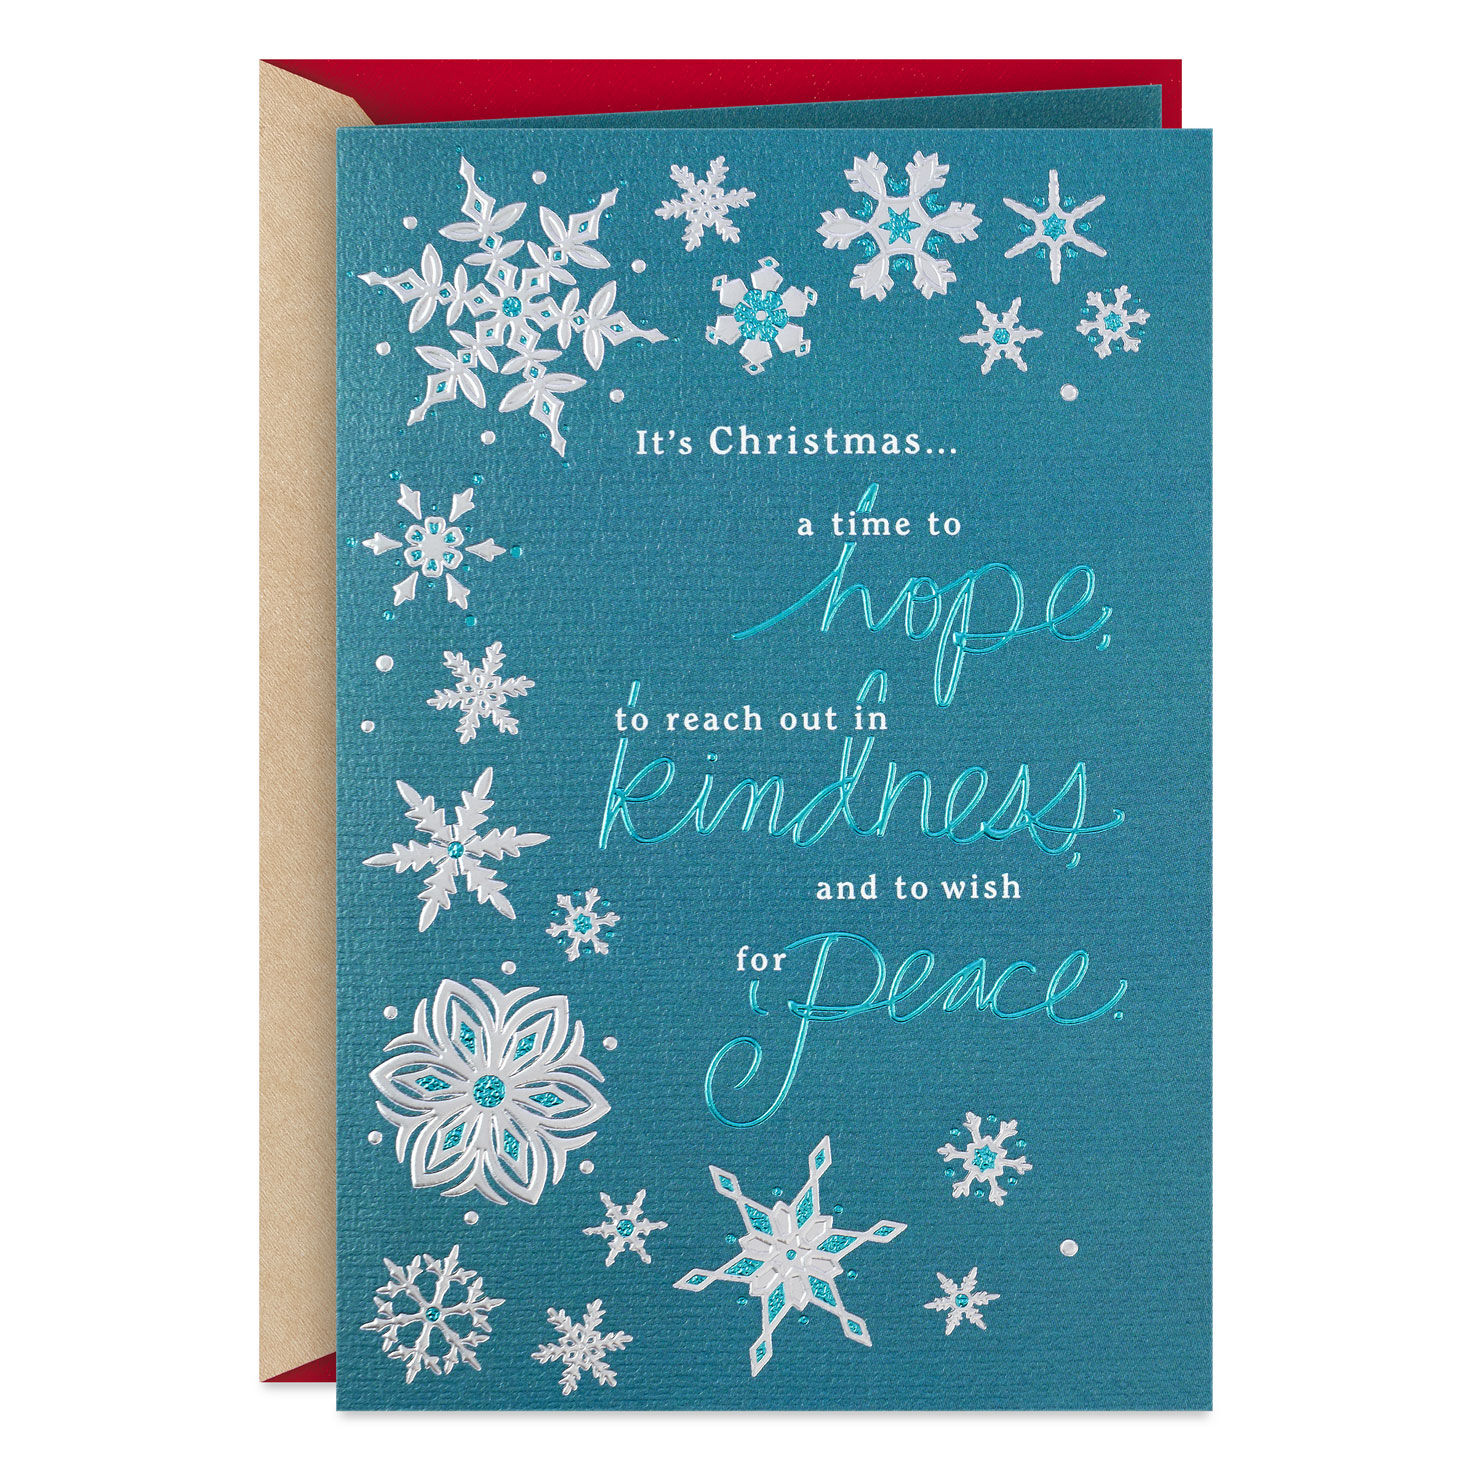 Shimmery Snowflakes Christmas Card for only USD 5.59 | Hallmark